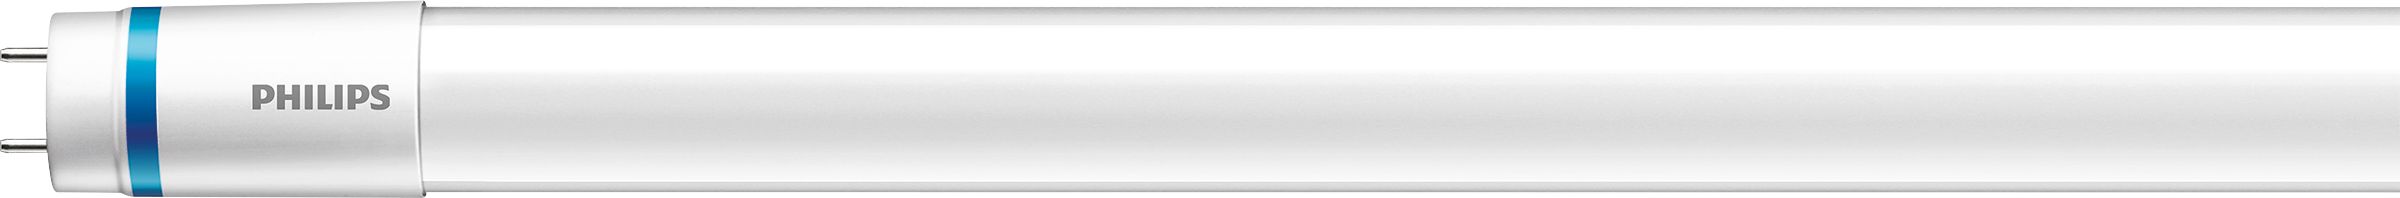 541839 Linear LED Tube Philips Lighting;Signify Lamps